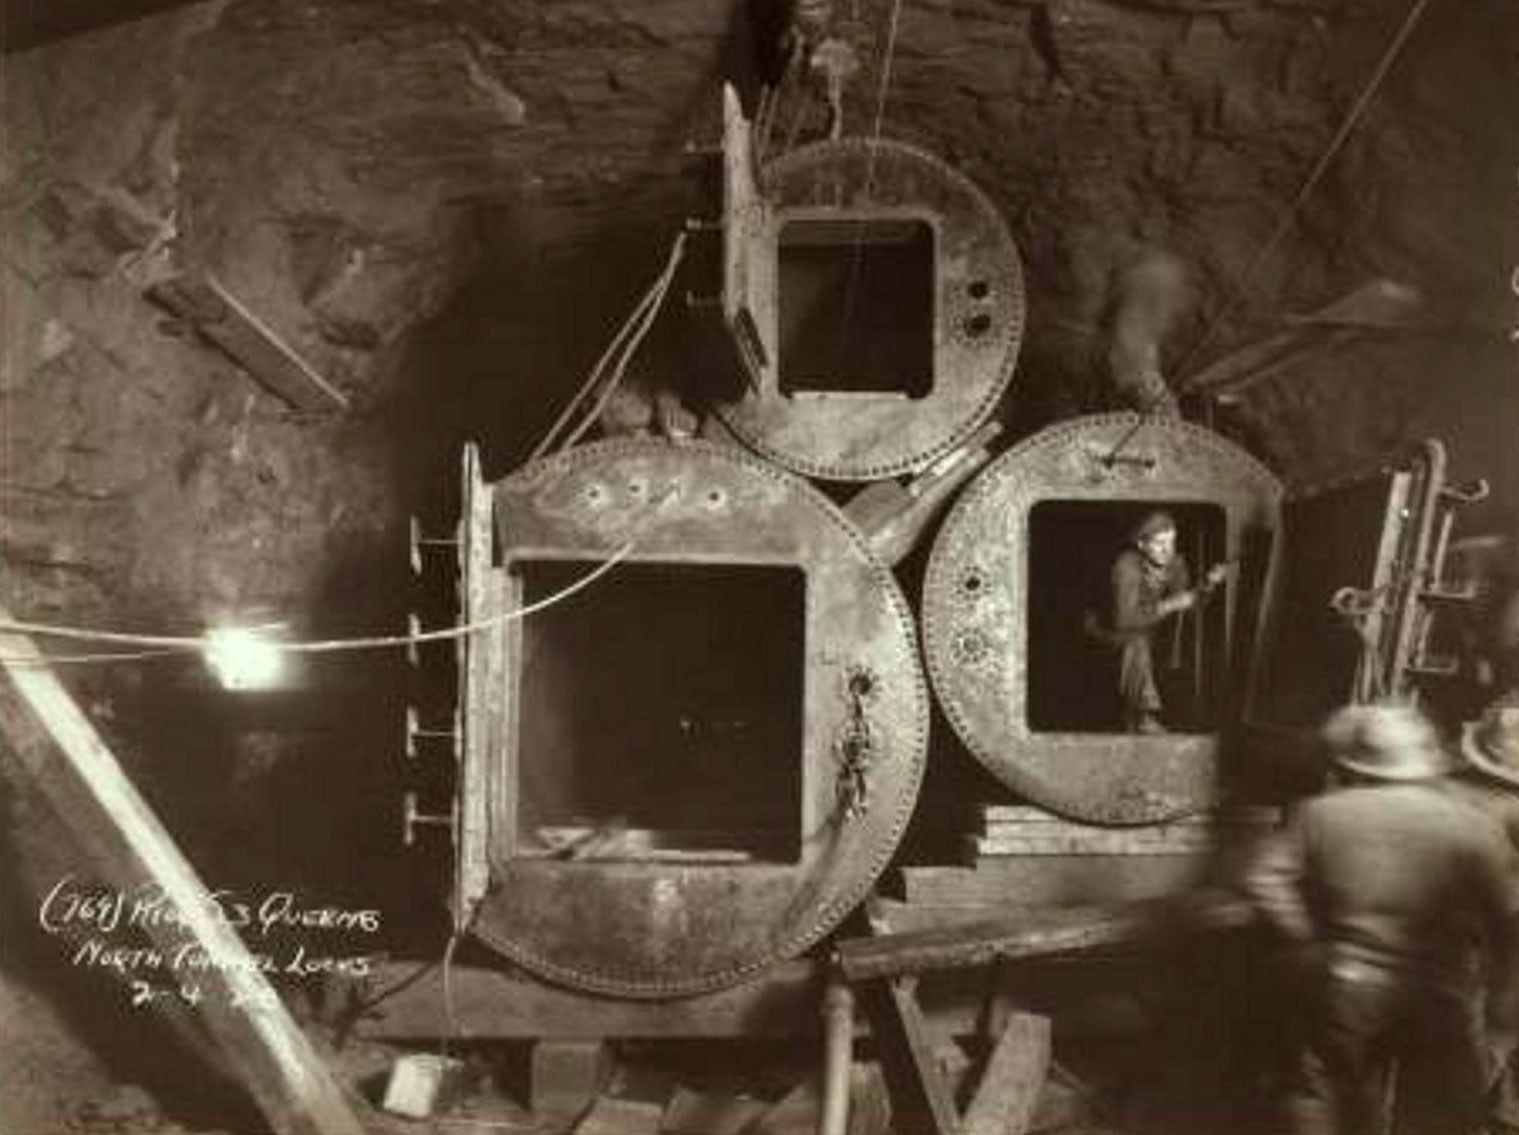 Workers excavate underground tunnels to build the subway system